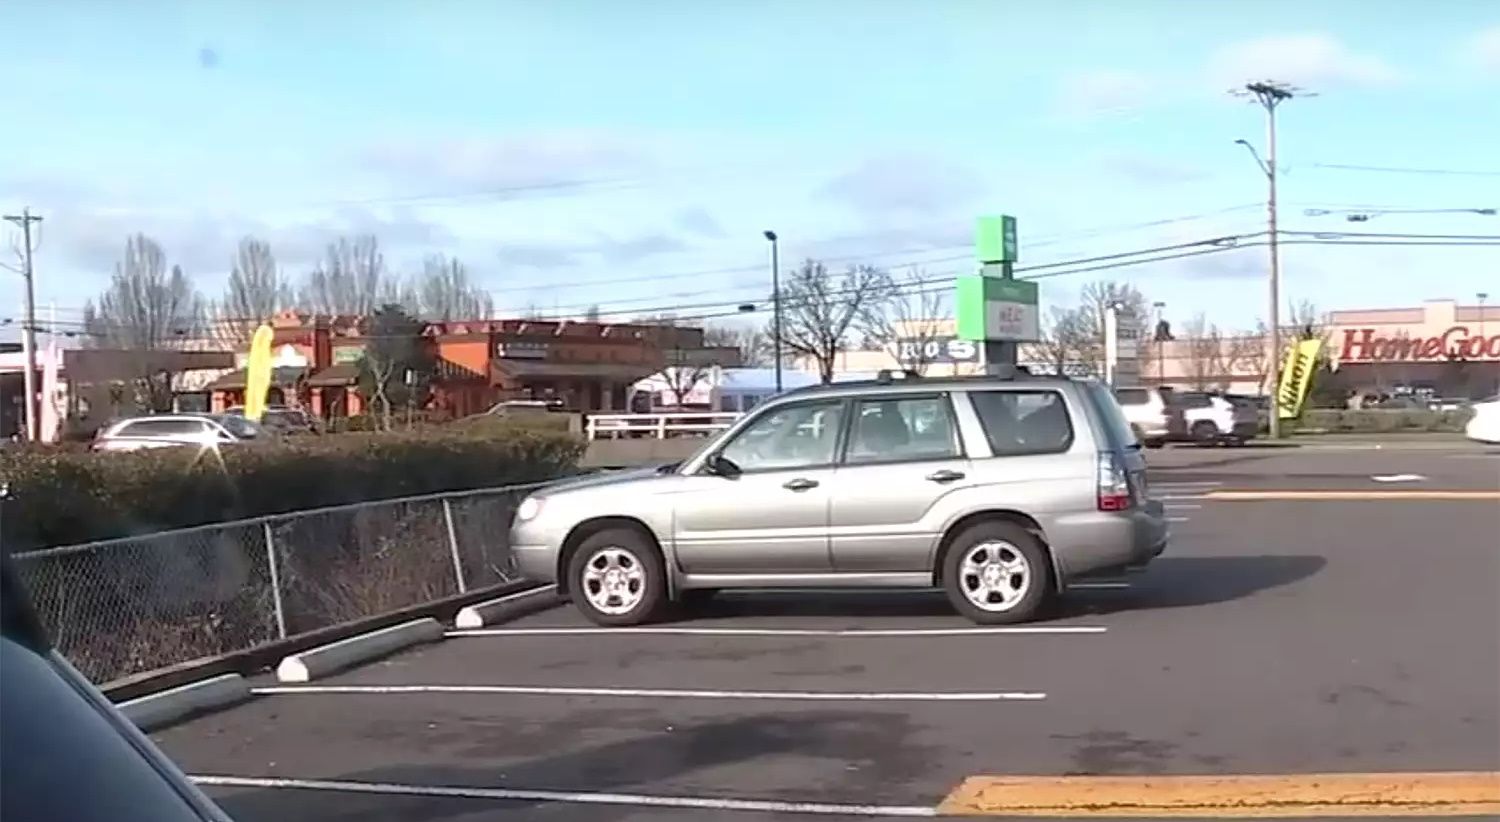 Oregon Car Thief Returns Vehicle To Yell At Owner For Leaving 4-Year-Old Son In The Back Seat